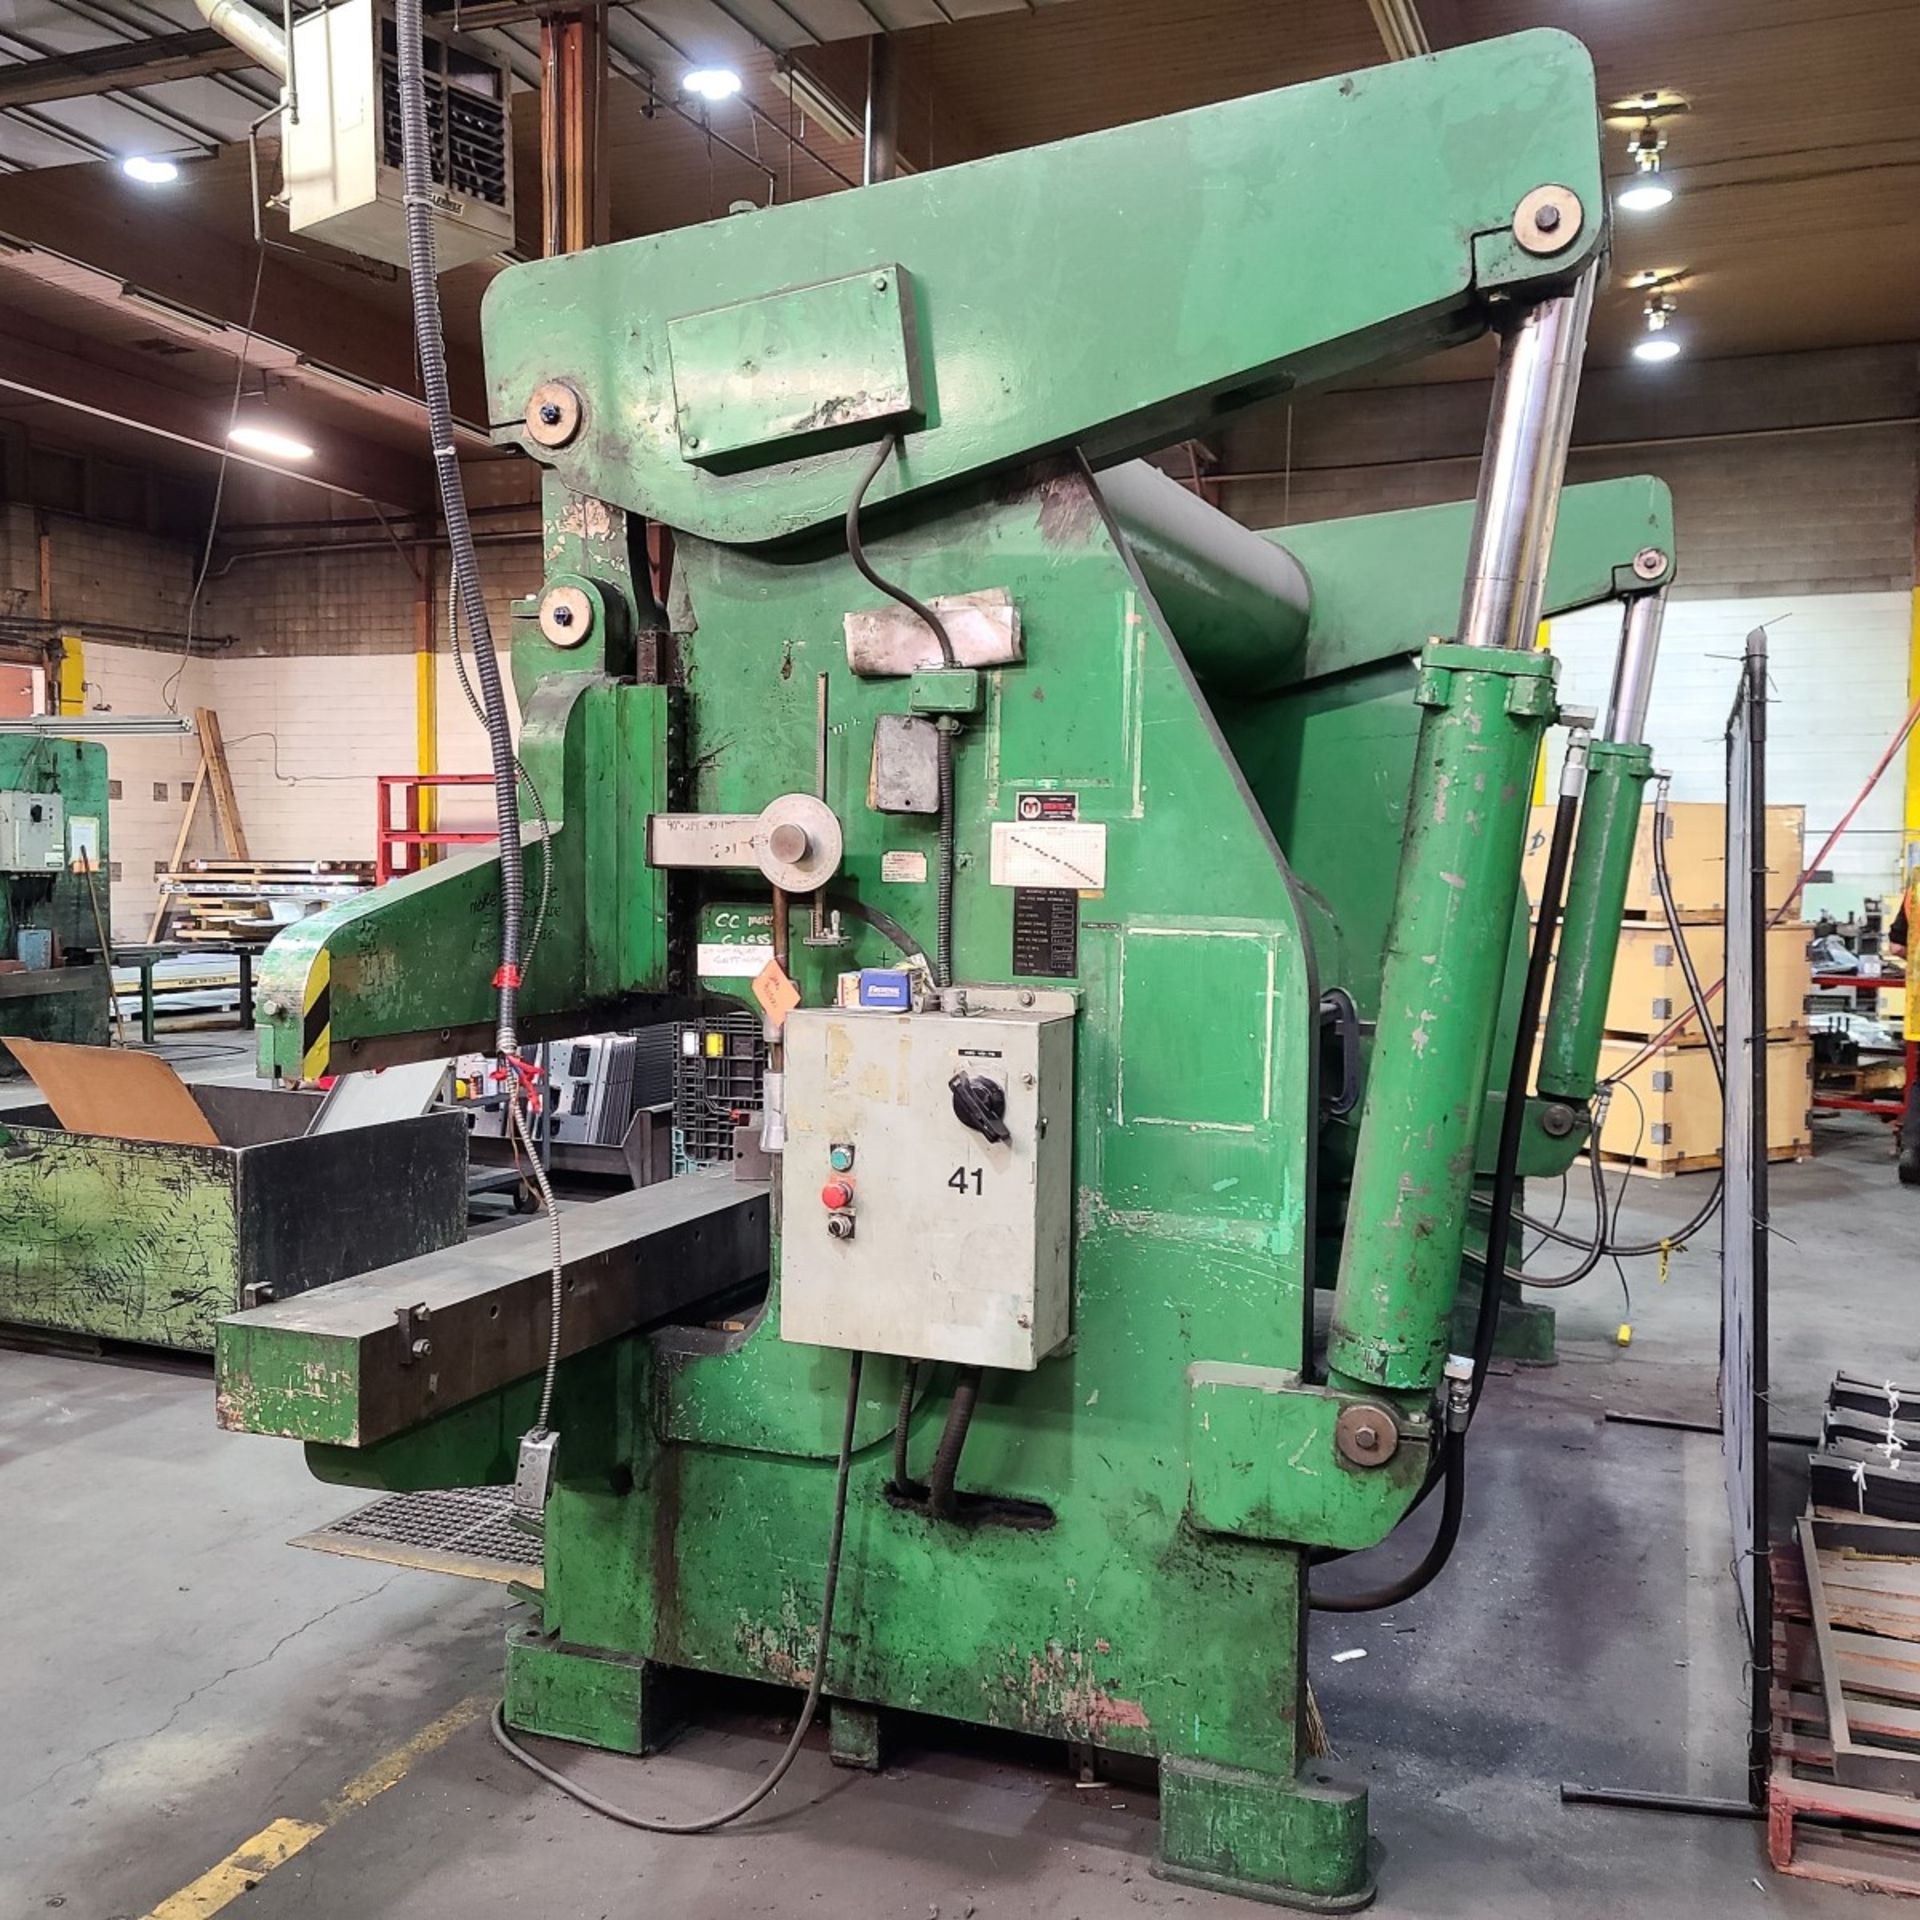 PRESS BRAKE – ACCURPRESS 250T X 16’ (2’ HORNS) MOD. 725012, 240V/3PH, NEW TOP FRONT BEARINGS ON - Image 4 of 12